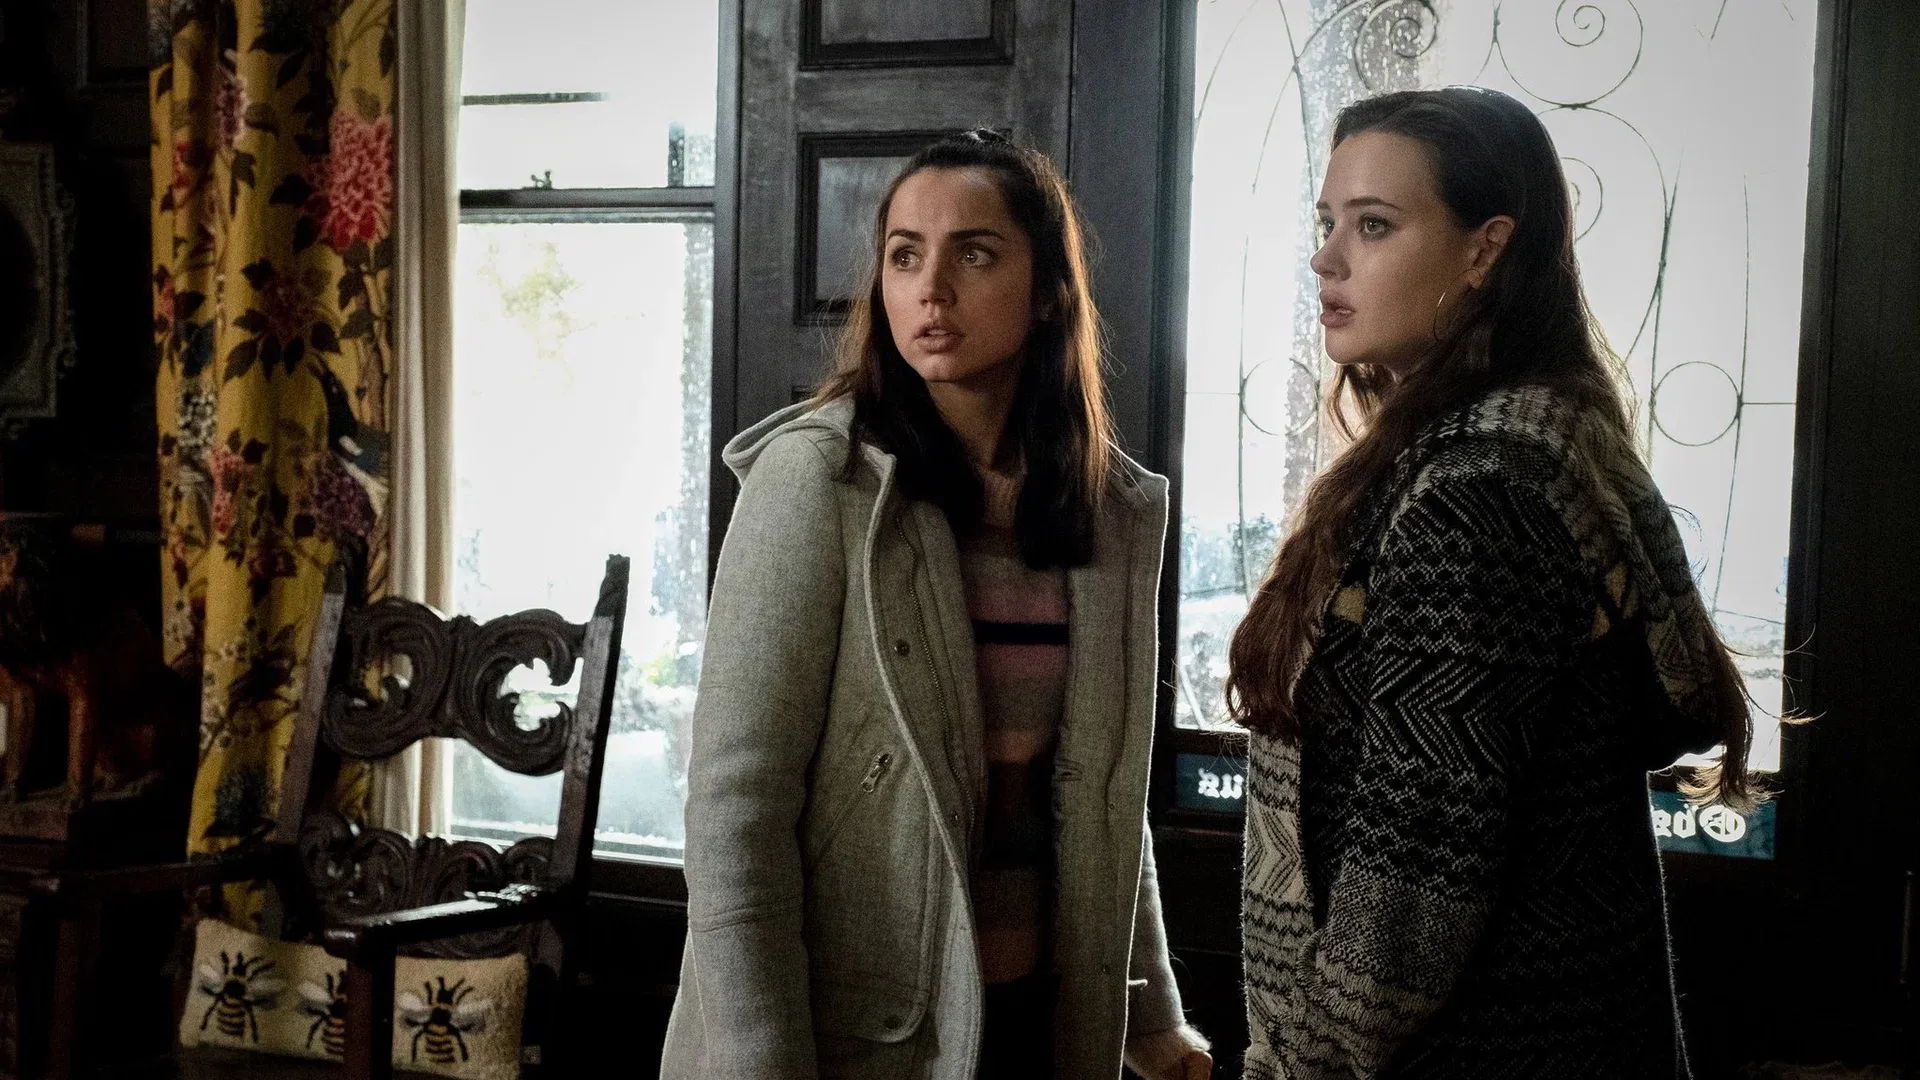 Katherine Langford and Ana de Armas in the movie 'Knives Out'